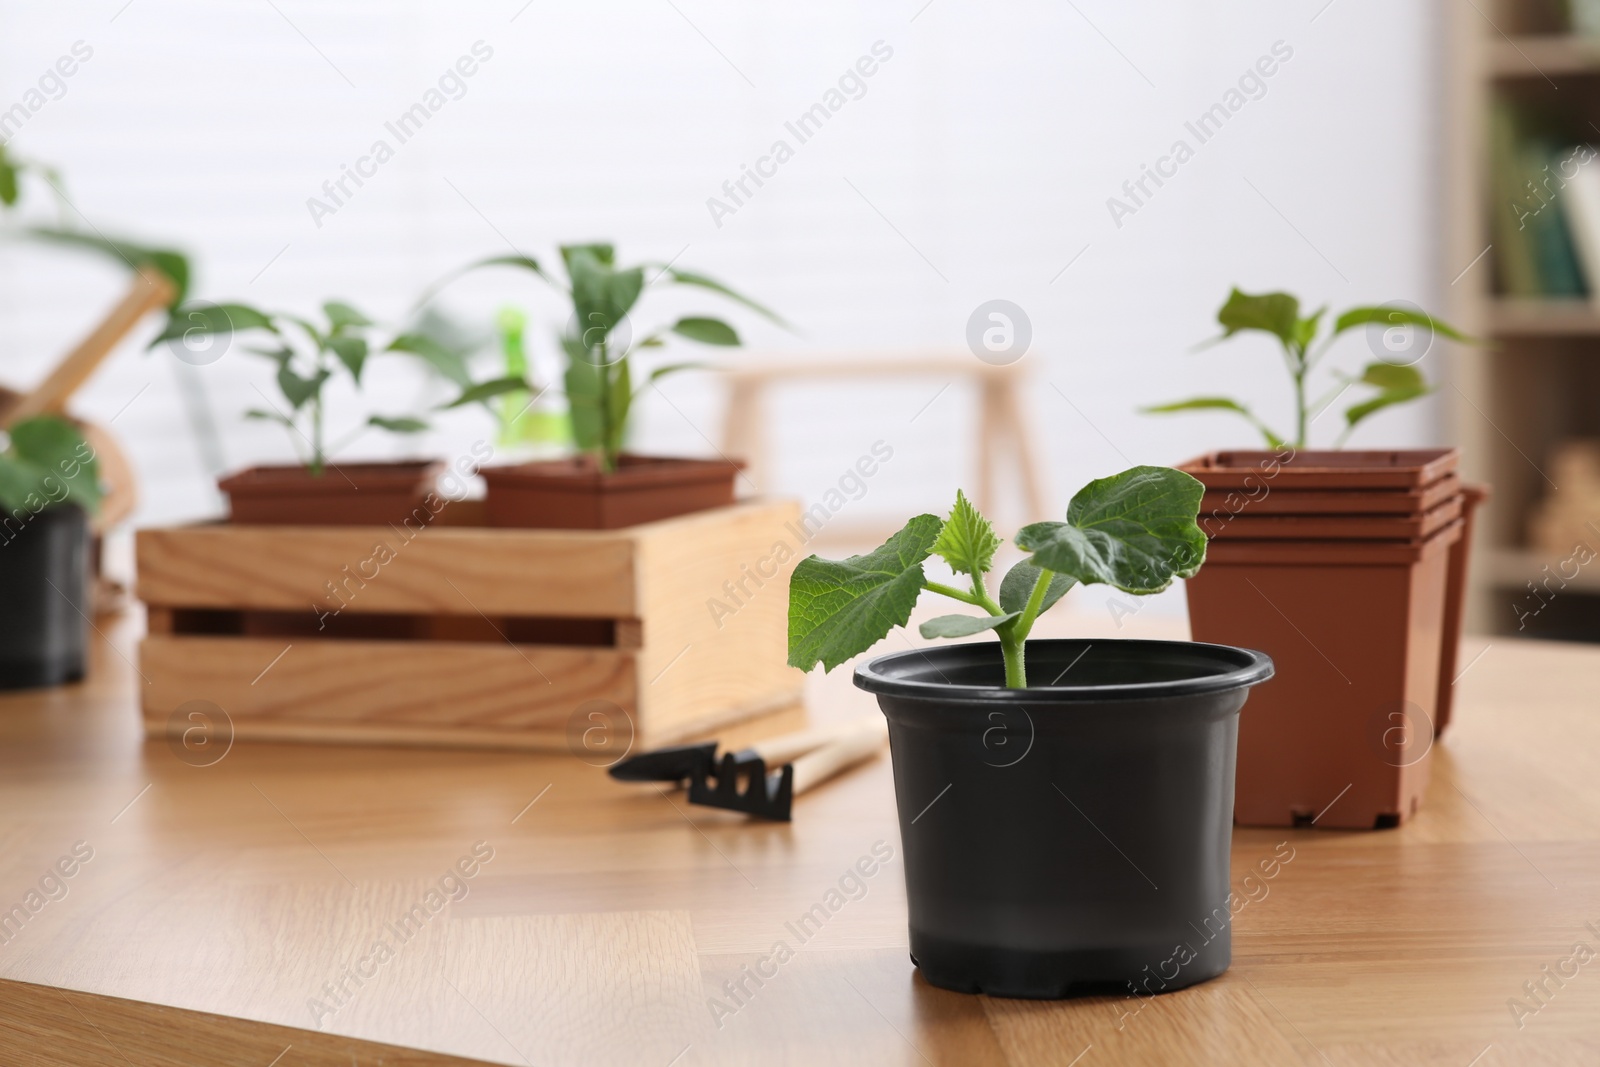 Photo of Seedlings growing in pots with soil on wooden table indoors. Space for text